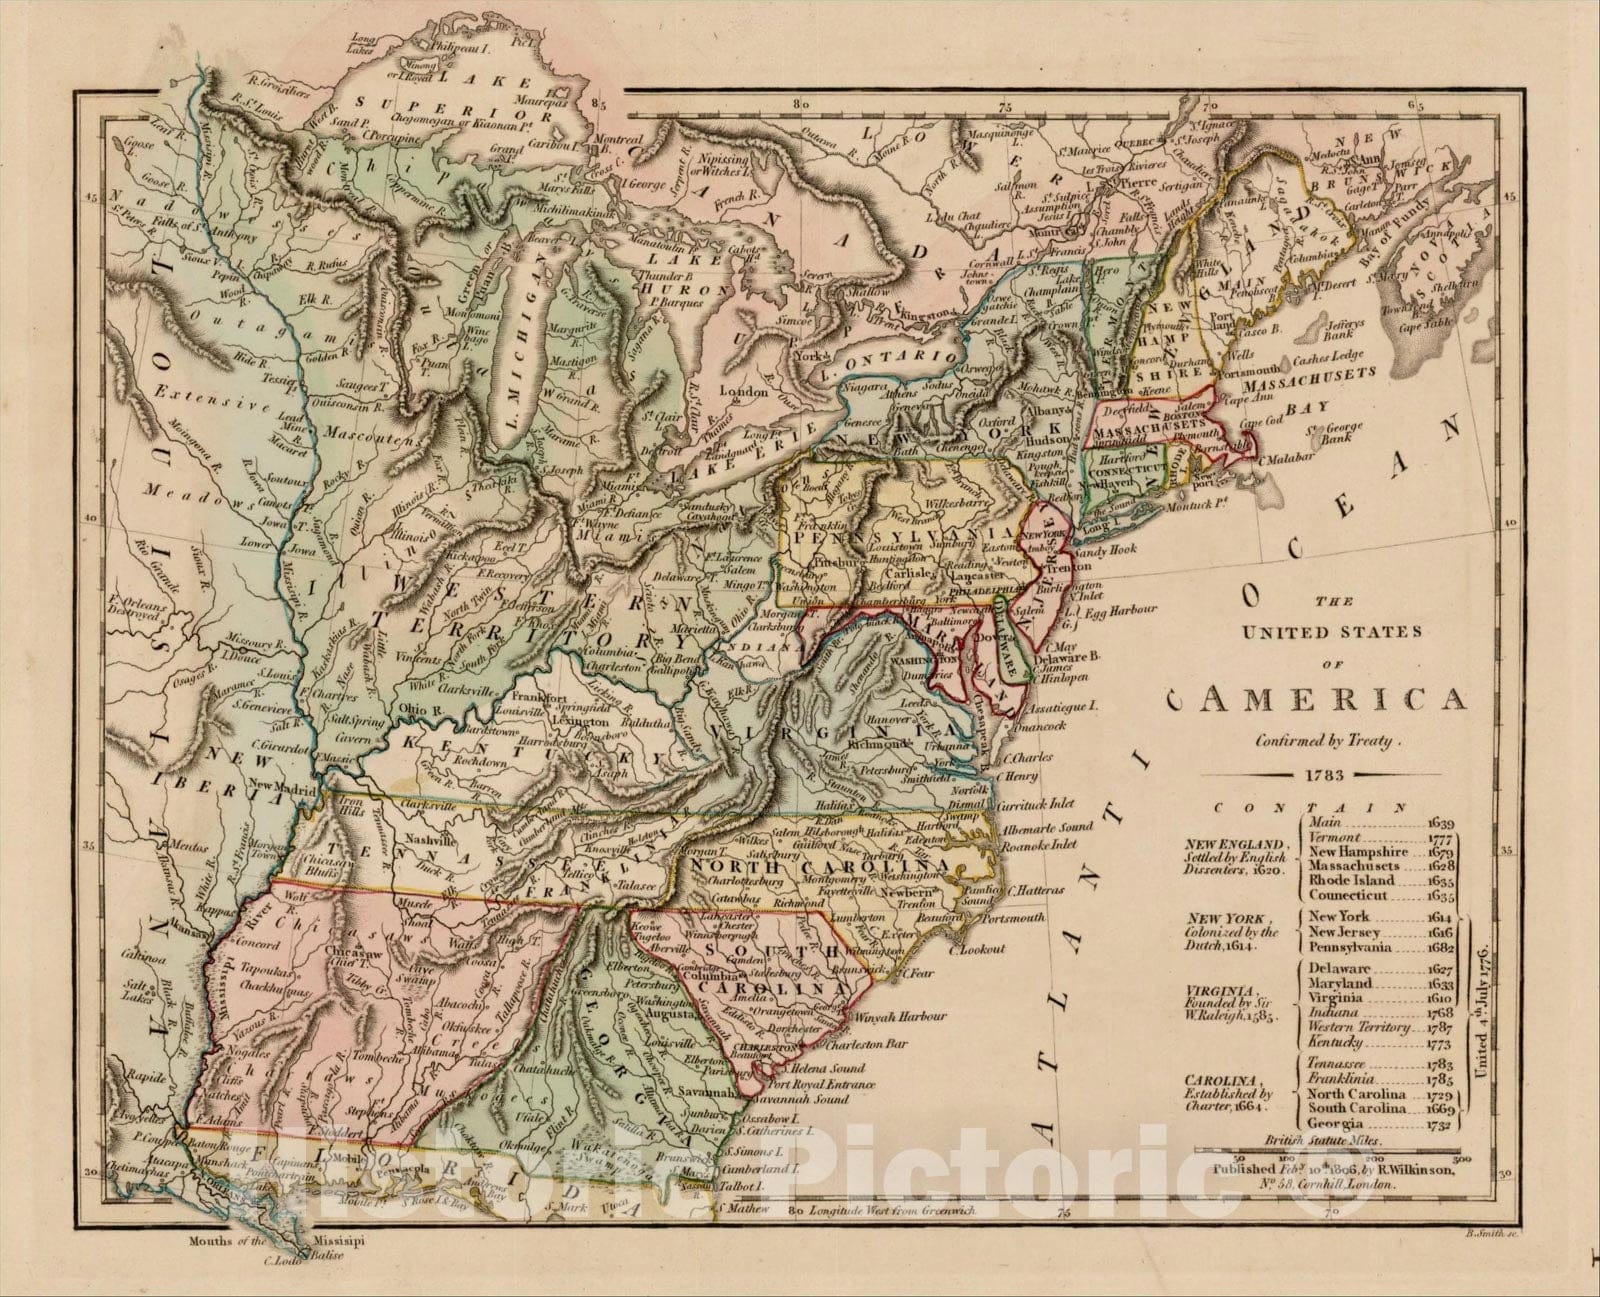 Historic Map : The United States of America Confirmed By Treaty 1783 [shows Franklinia], 1806, Robert Wilkinson, v1, Vintage Wall Art